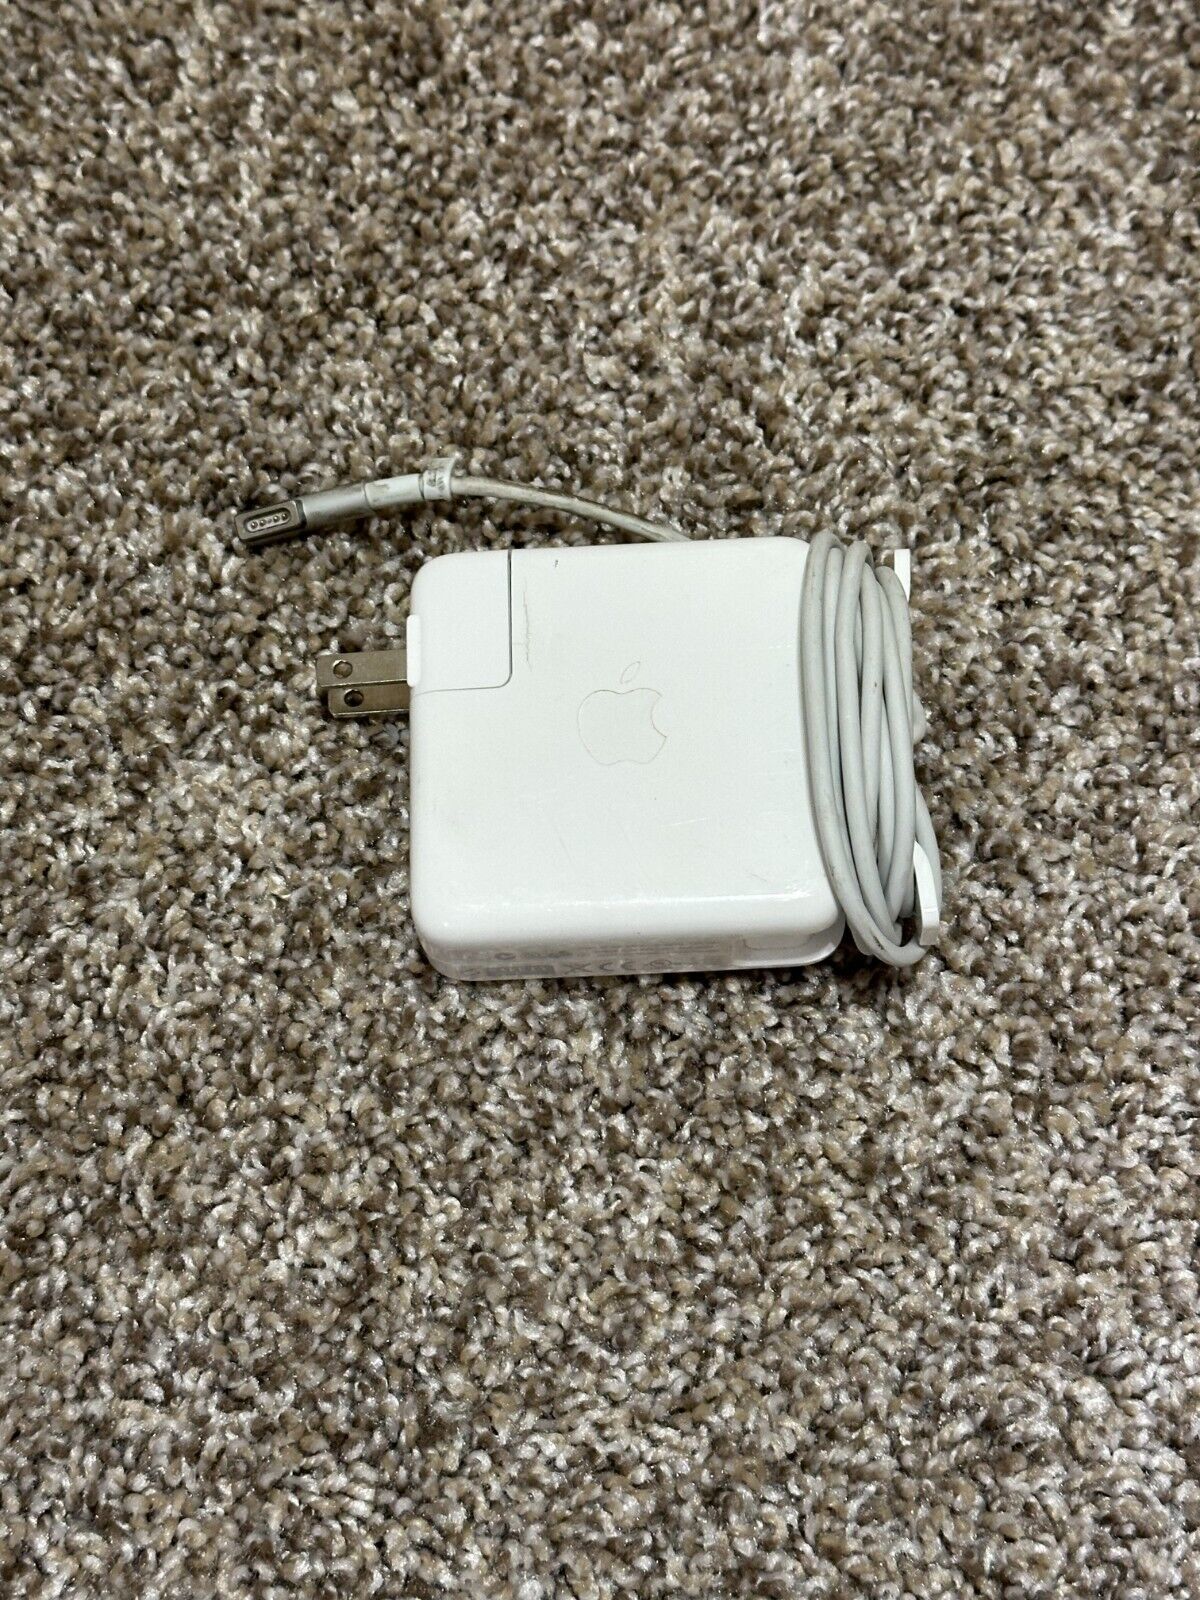 Primary image for Apple A1344 MagSafe Power Adapter for MacBook and MacBook Pro 60W OEM Genuine